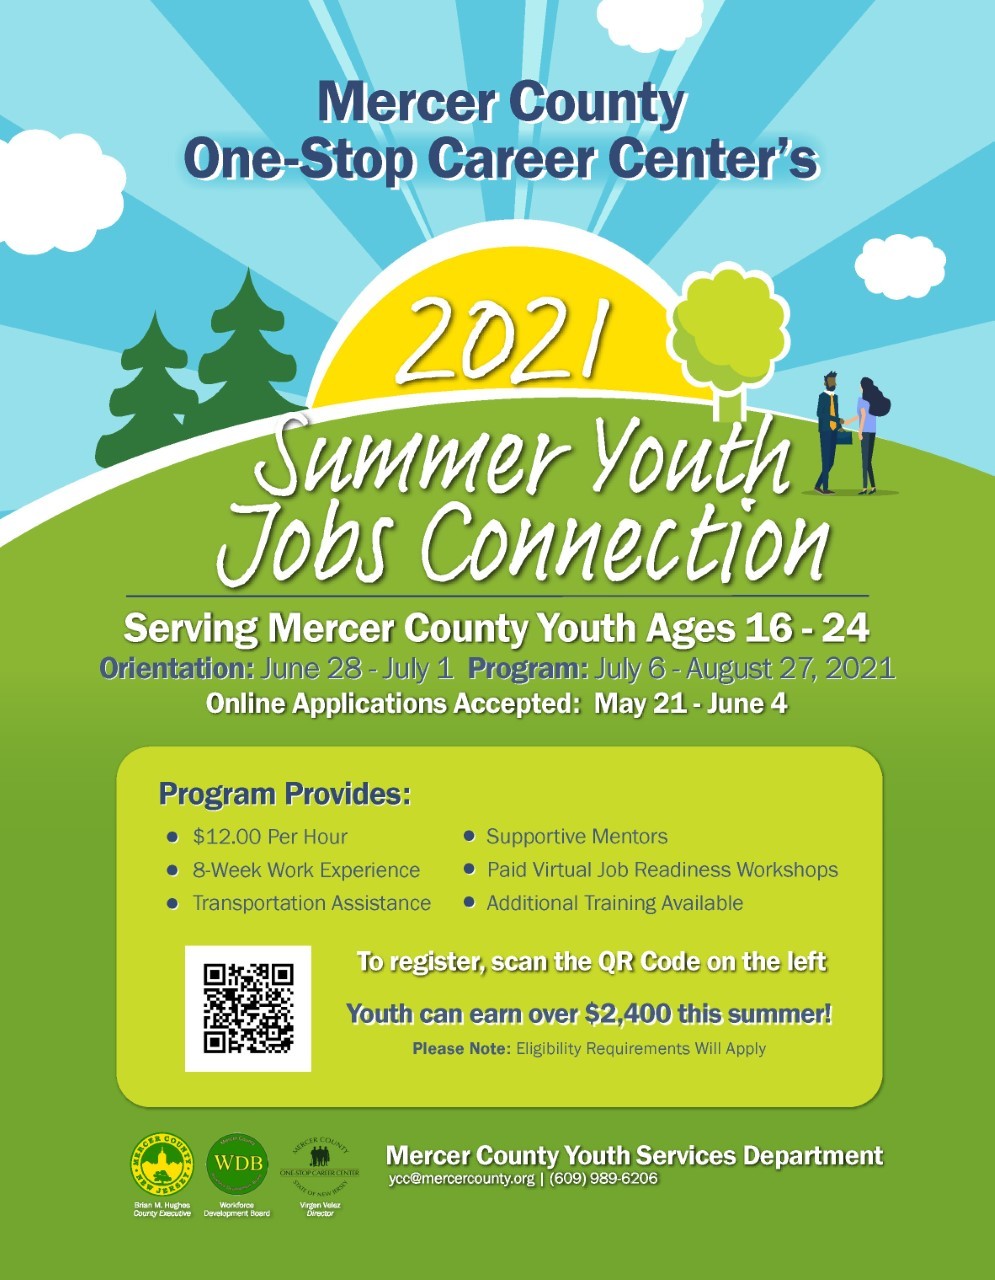 Apply now for a summer job through Mercer County!